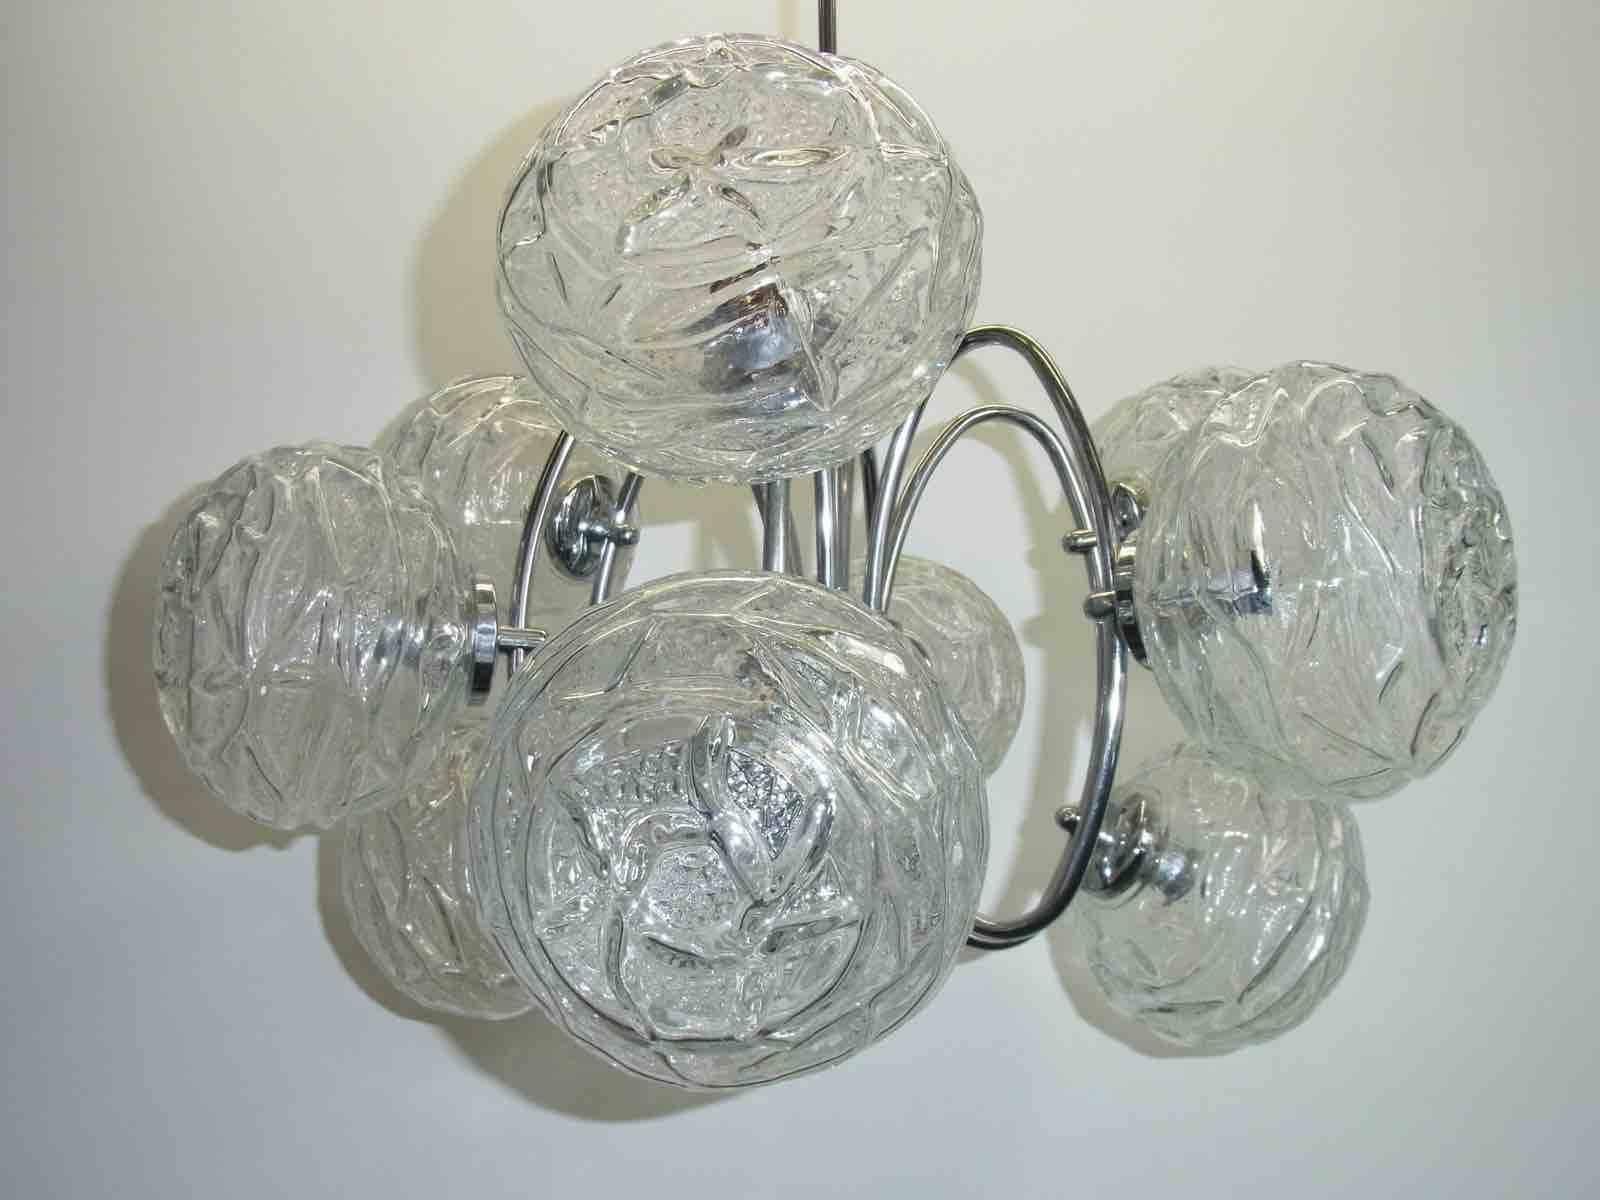 German Mid-Century Modern Polished Chrome and Glass Ball Chandelier For Sale 1